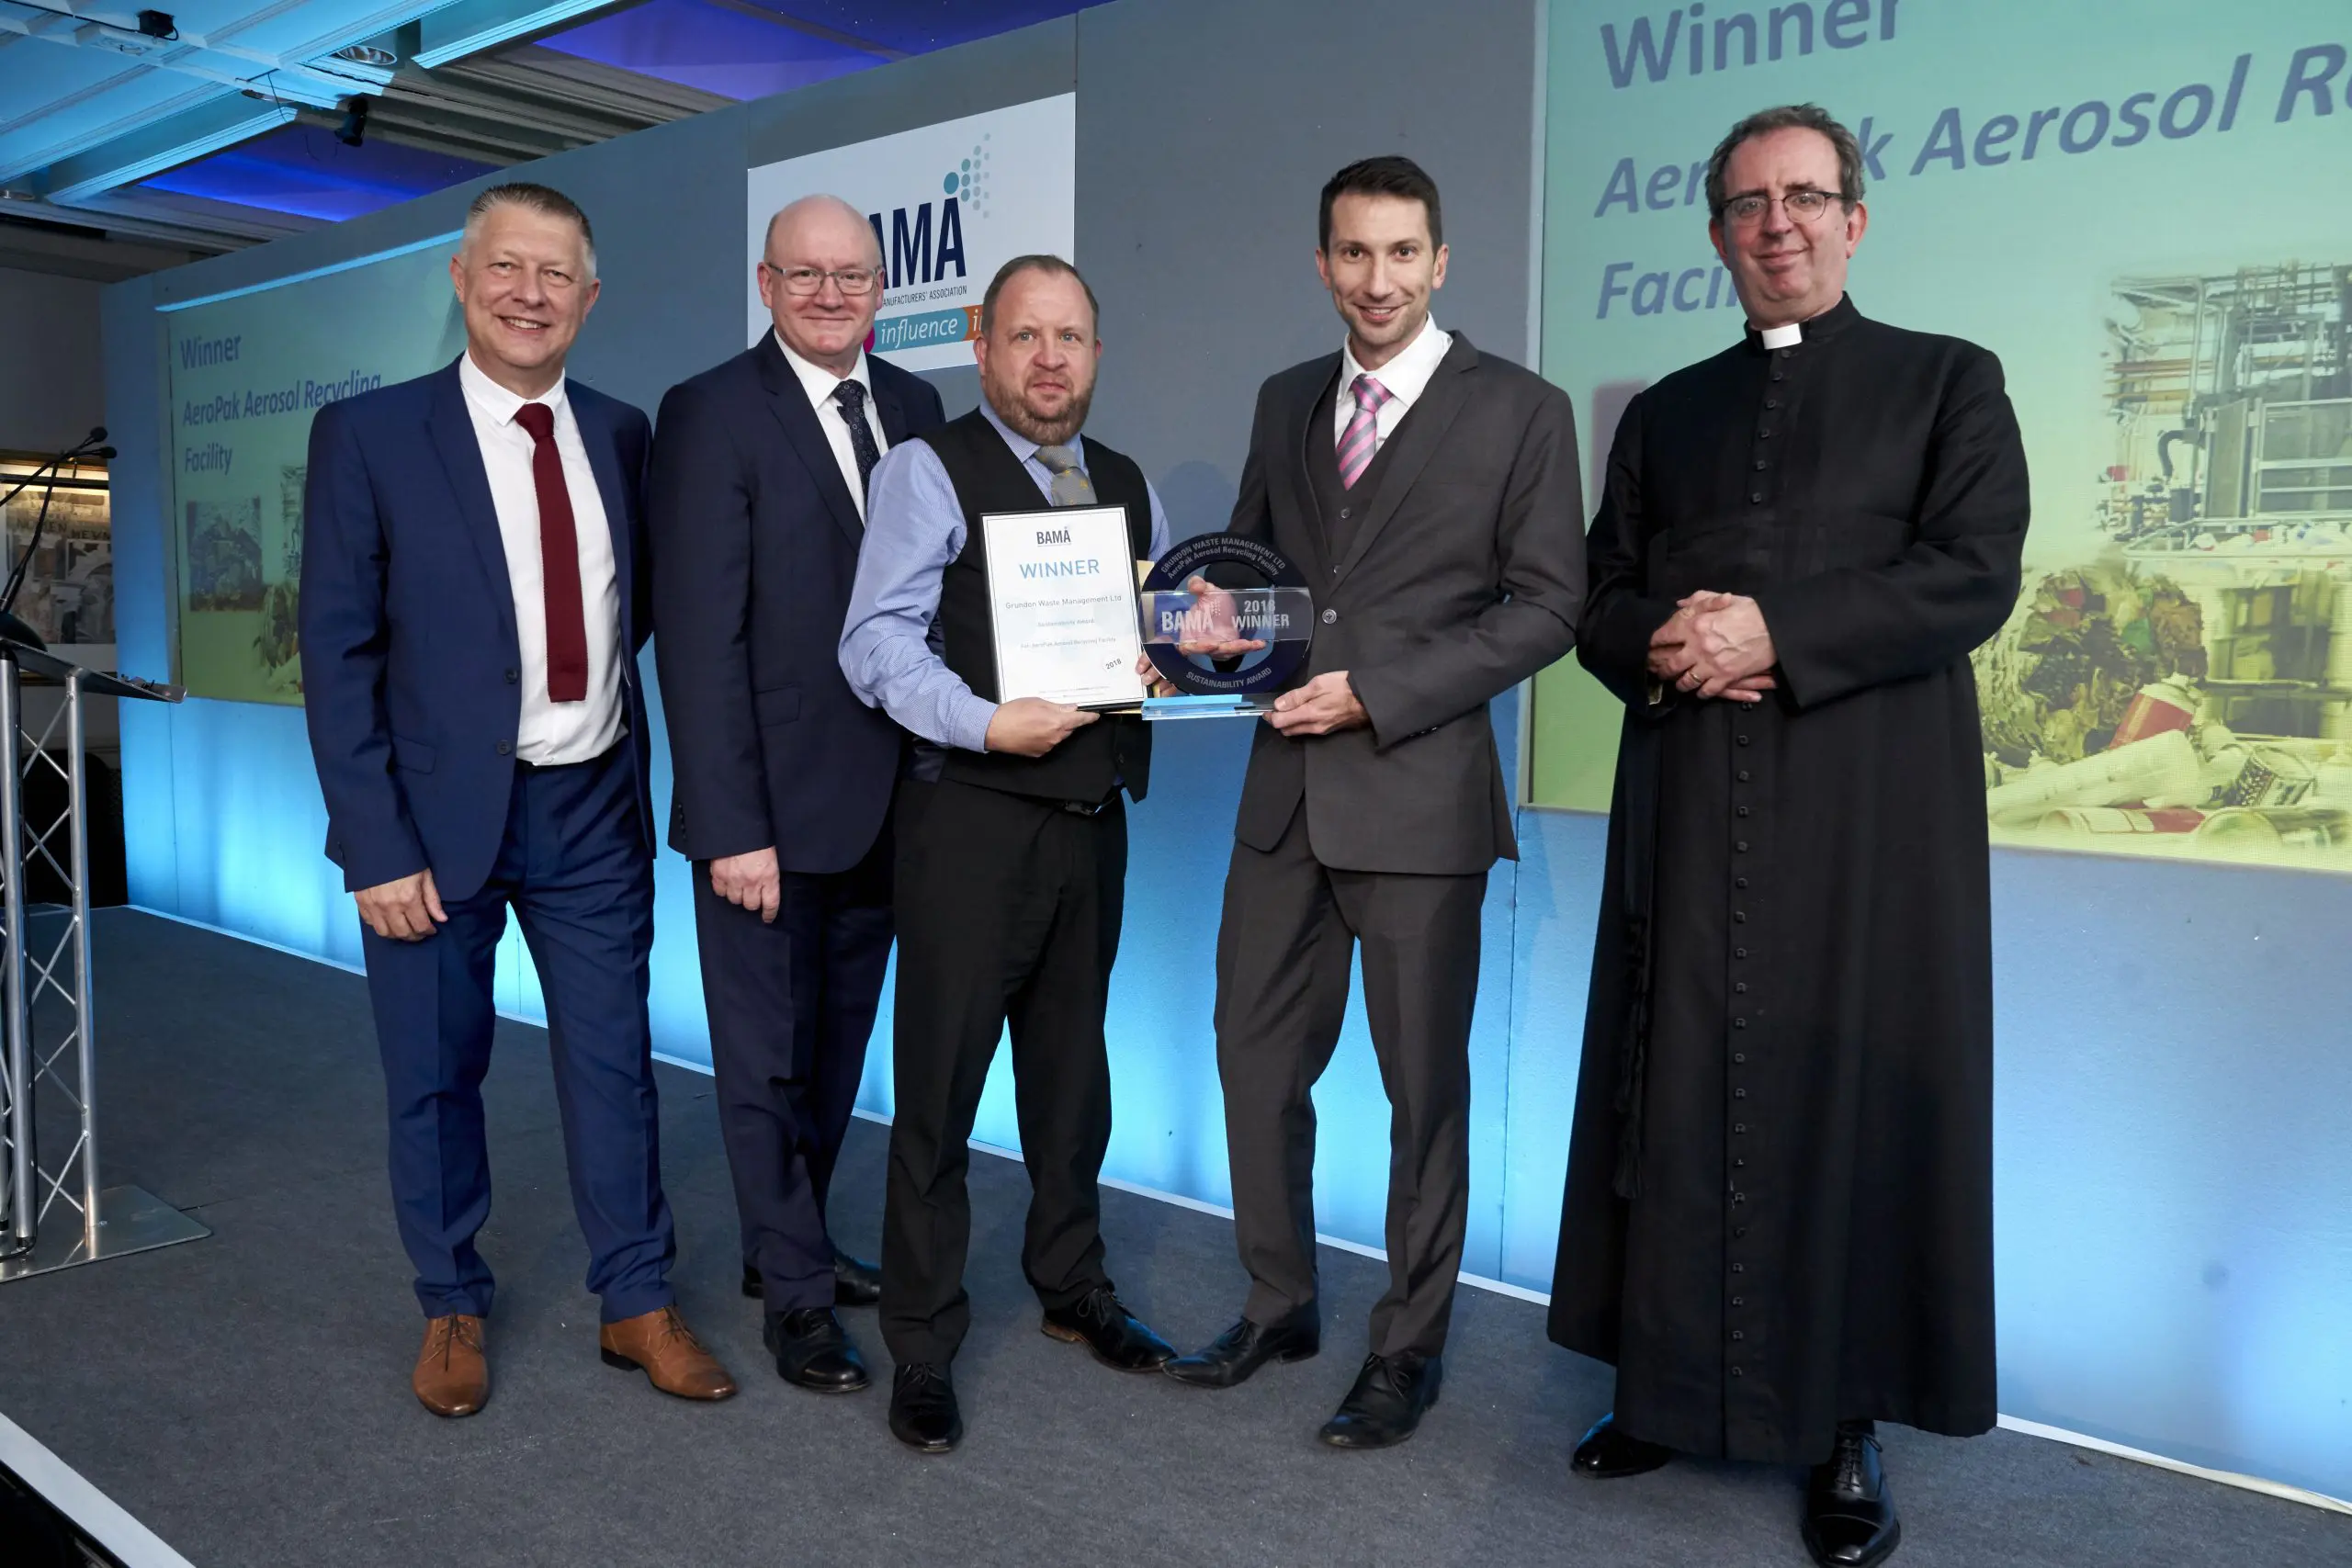 Grundon's Paul McConaghy and Tim Buxton celebrate winning the prestigious BAMA Sustainability Award 2018, which was presented to them by the Reverend Richard Coles.